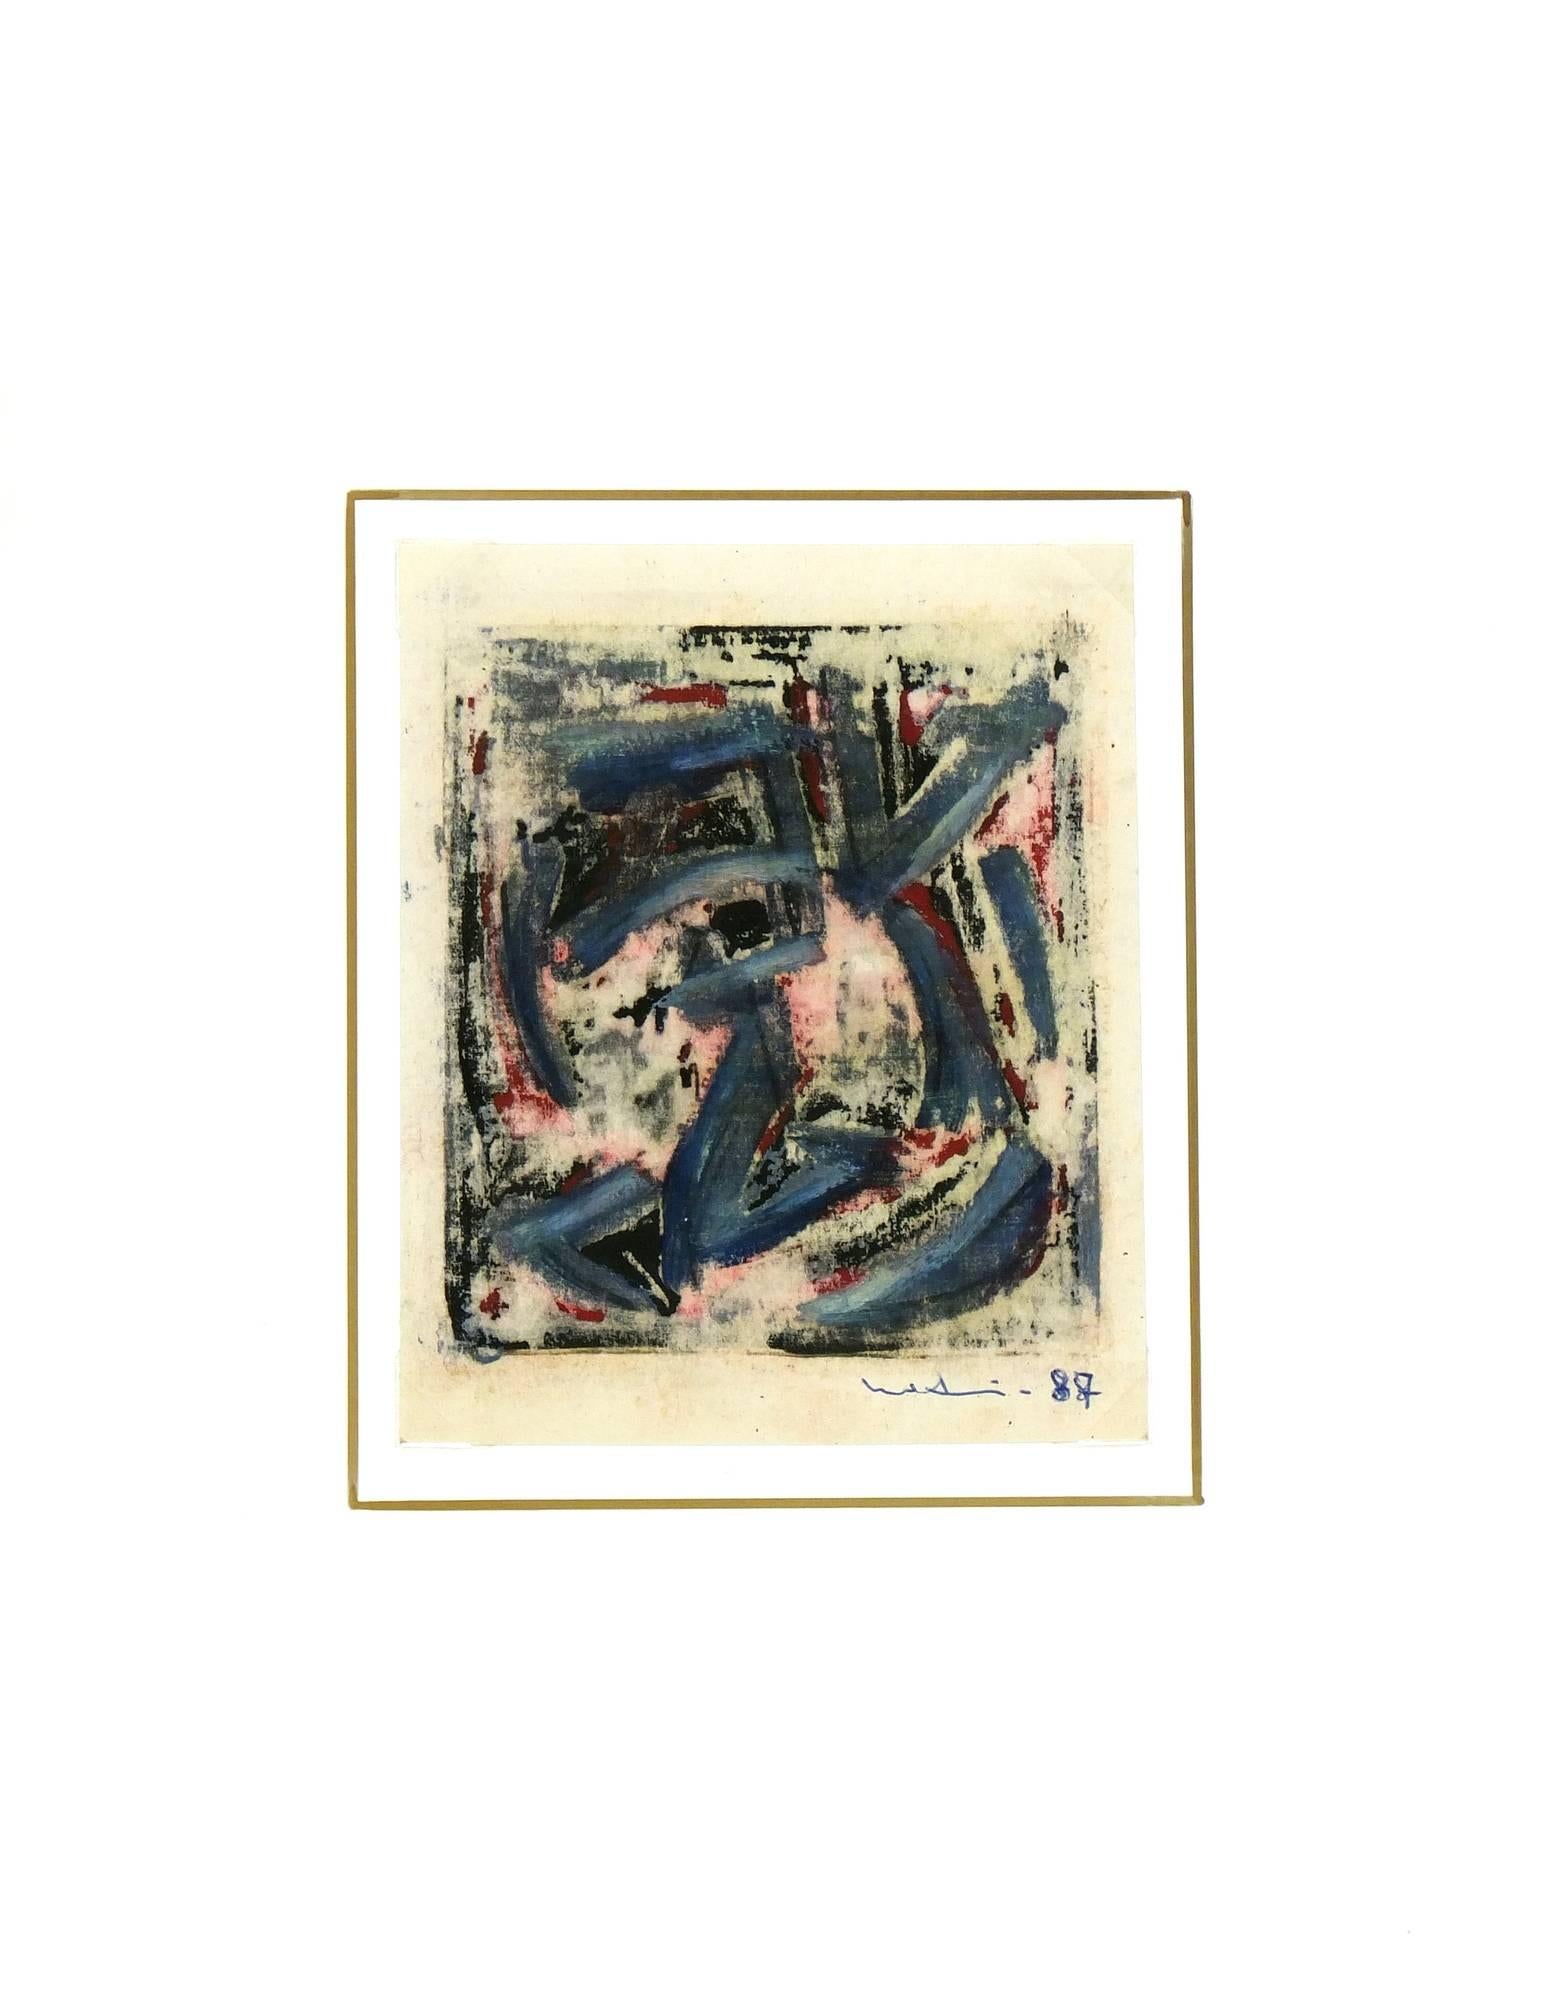 Abstract monotype in blue, black and red, 1987.  Signed and dated lower right. 

Original artwork on paper displayed on a white mat with a gold border. Mat fits a standard-size frame.  Archival plastic sleeve and Certificate of Authenticity